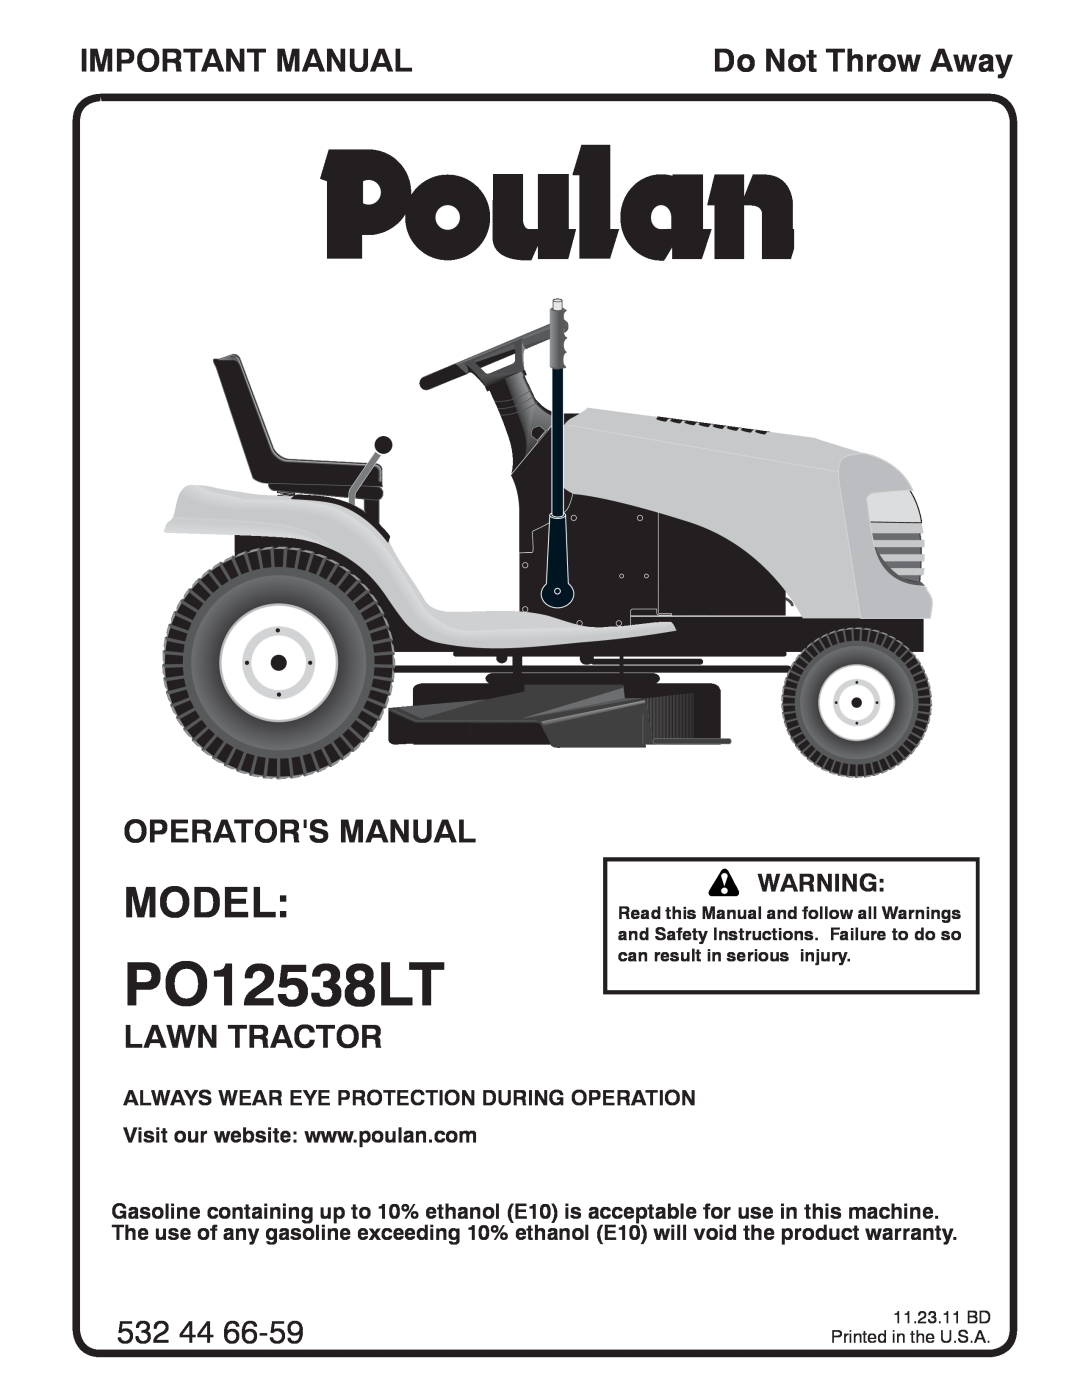 Poulan PO12538LT warranty Model, Important Manual, Operators Manual, Lawn Tractor, 532, Do Not Throw Away 